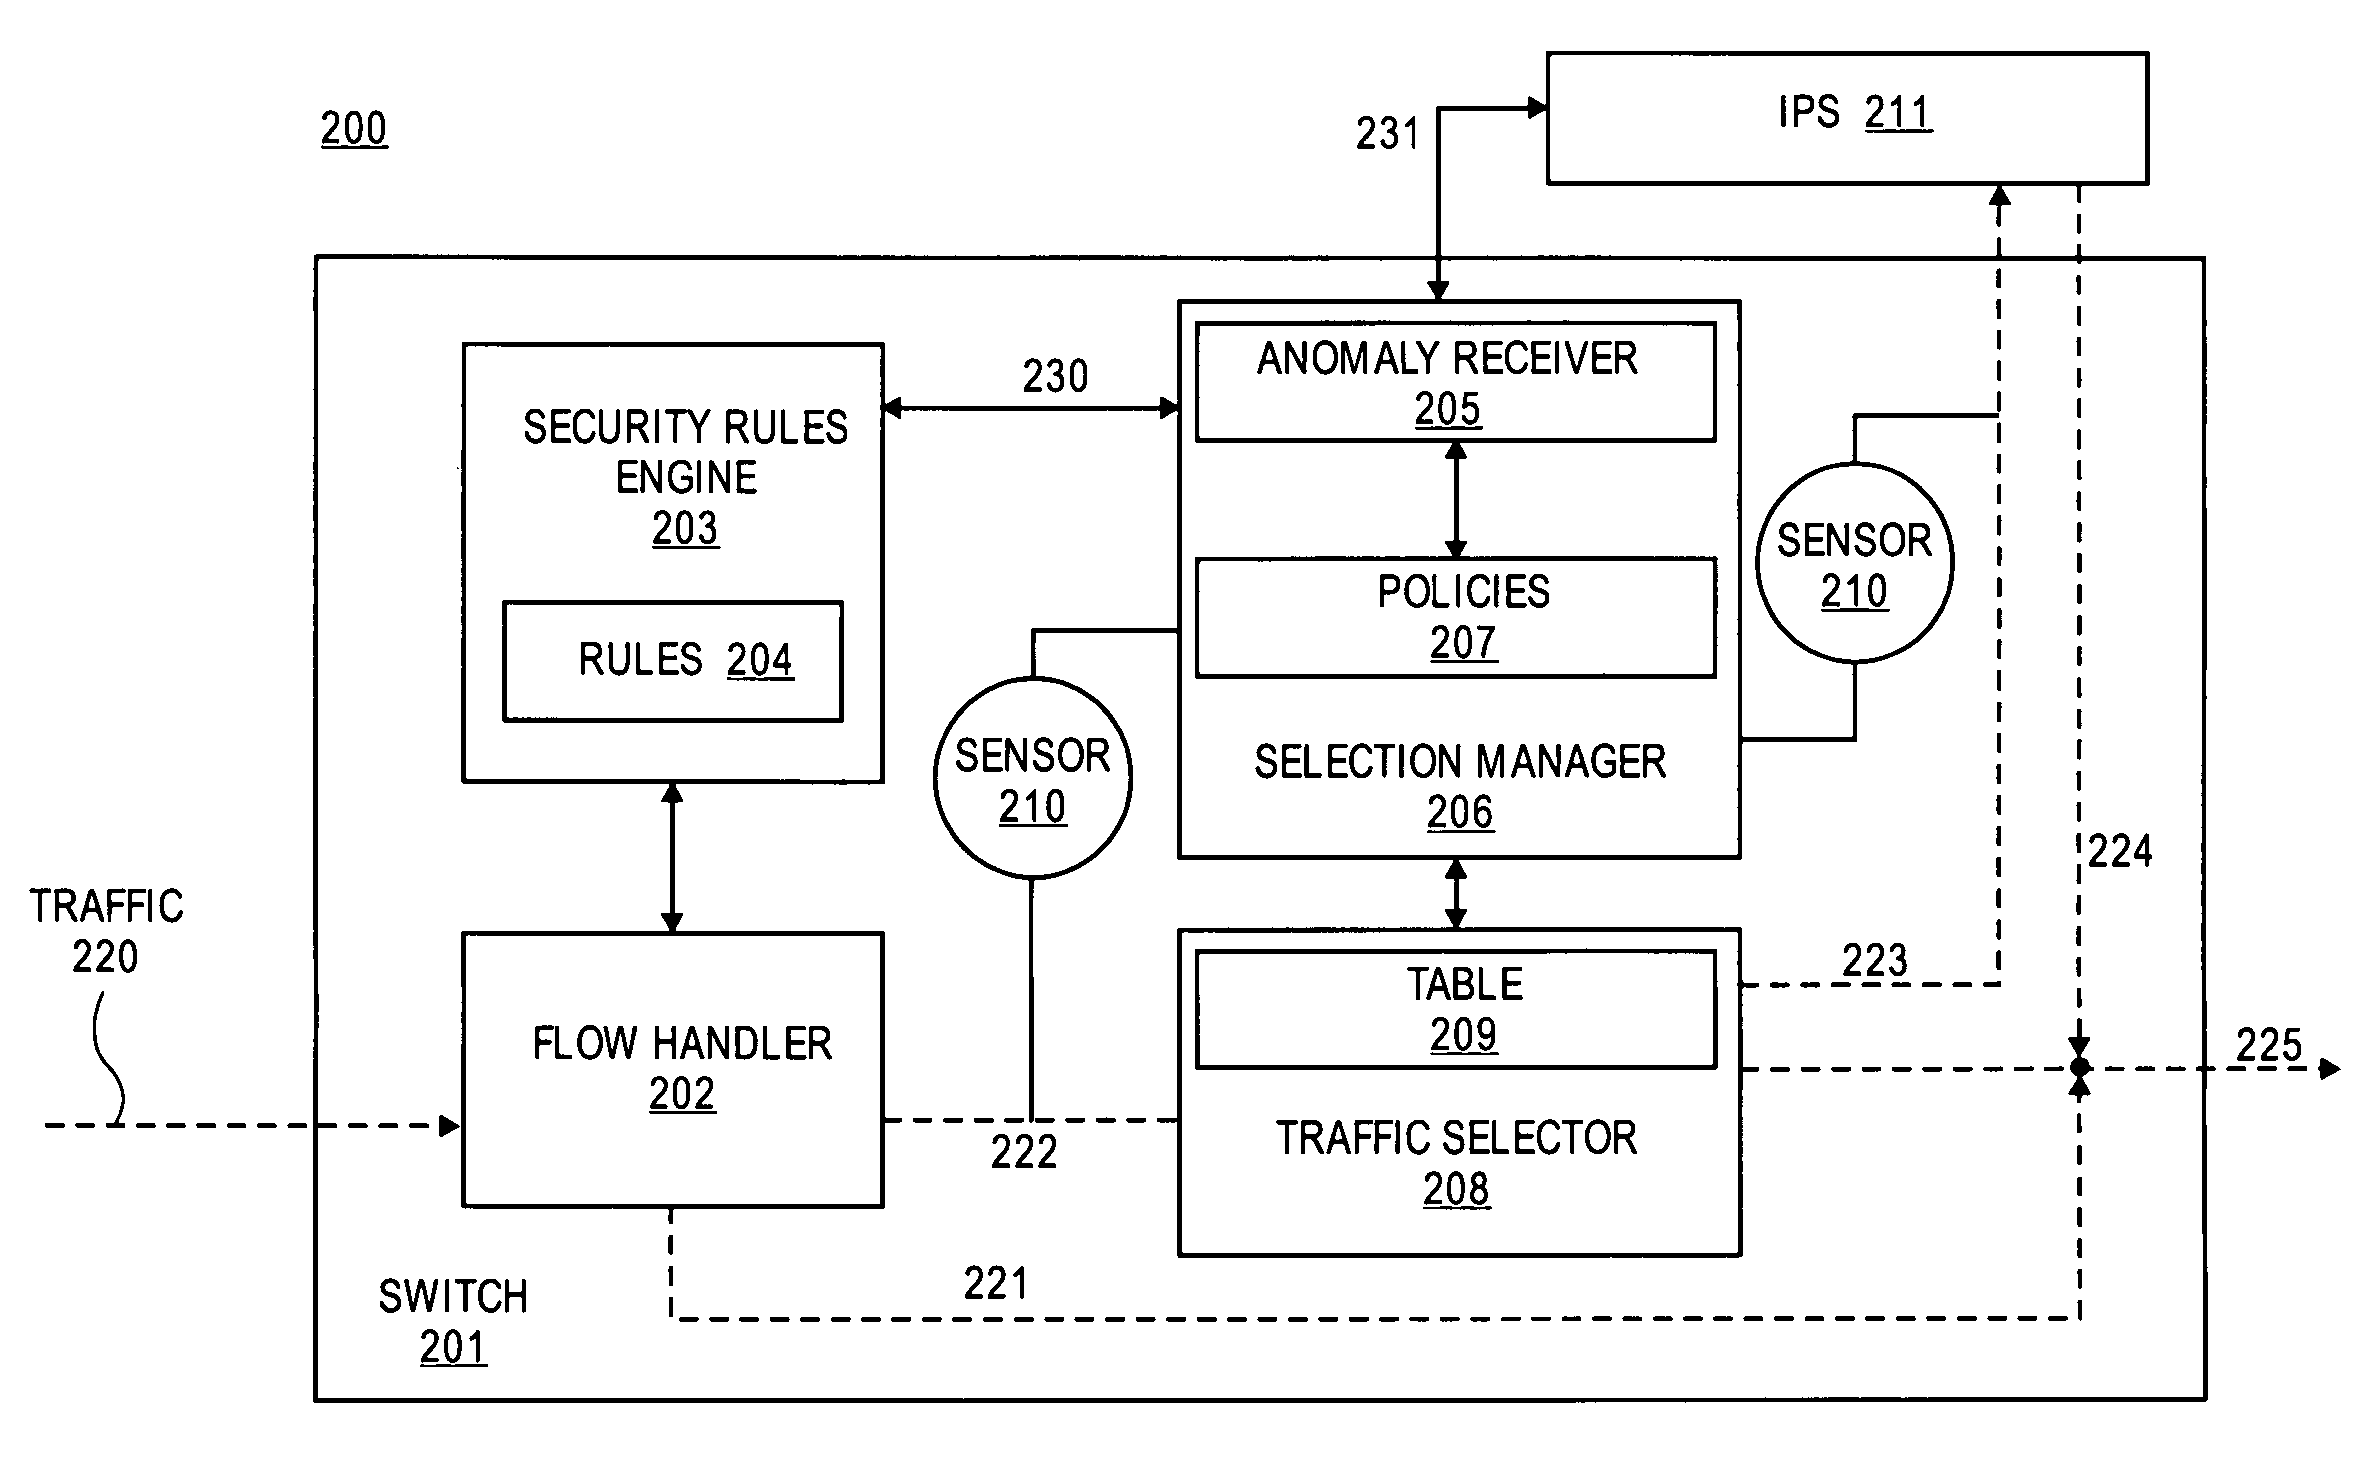 Method and apparatus for dynamic anomaly-based updates to traffic selection policies in a switch